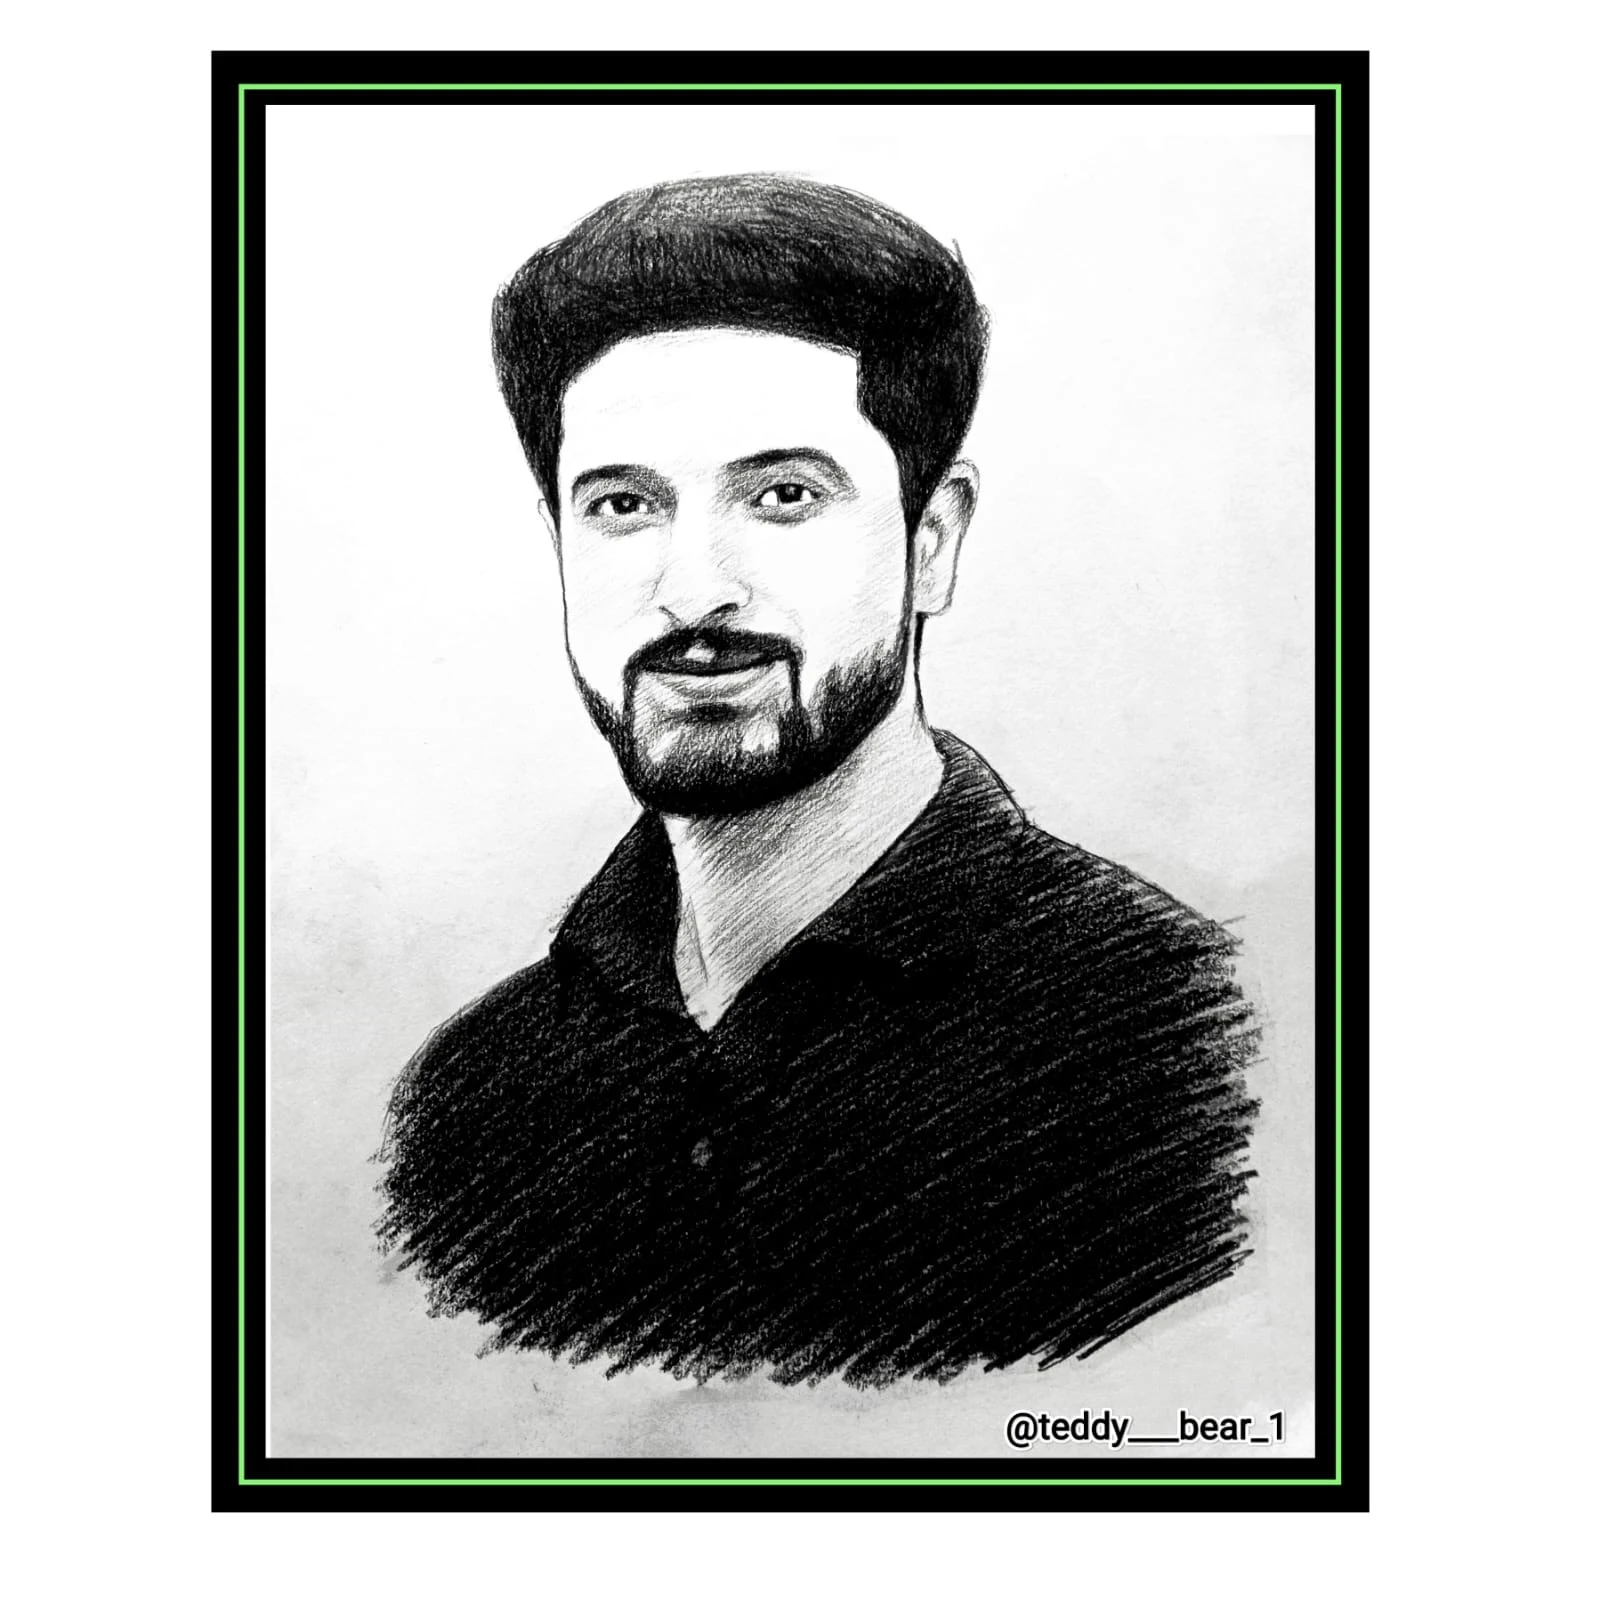 Faisal Farooz, a 19-year-old resident of the scenic village of Gulzarpora in South Kashmir, is on the path to realizing dhis dream of becoming an artist